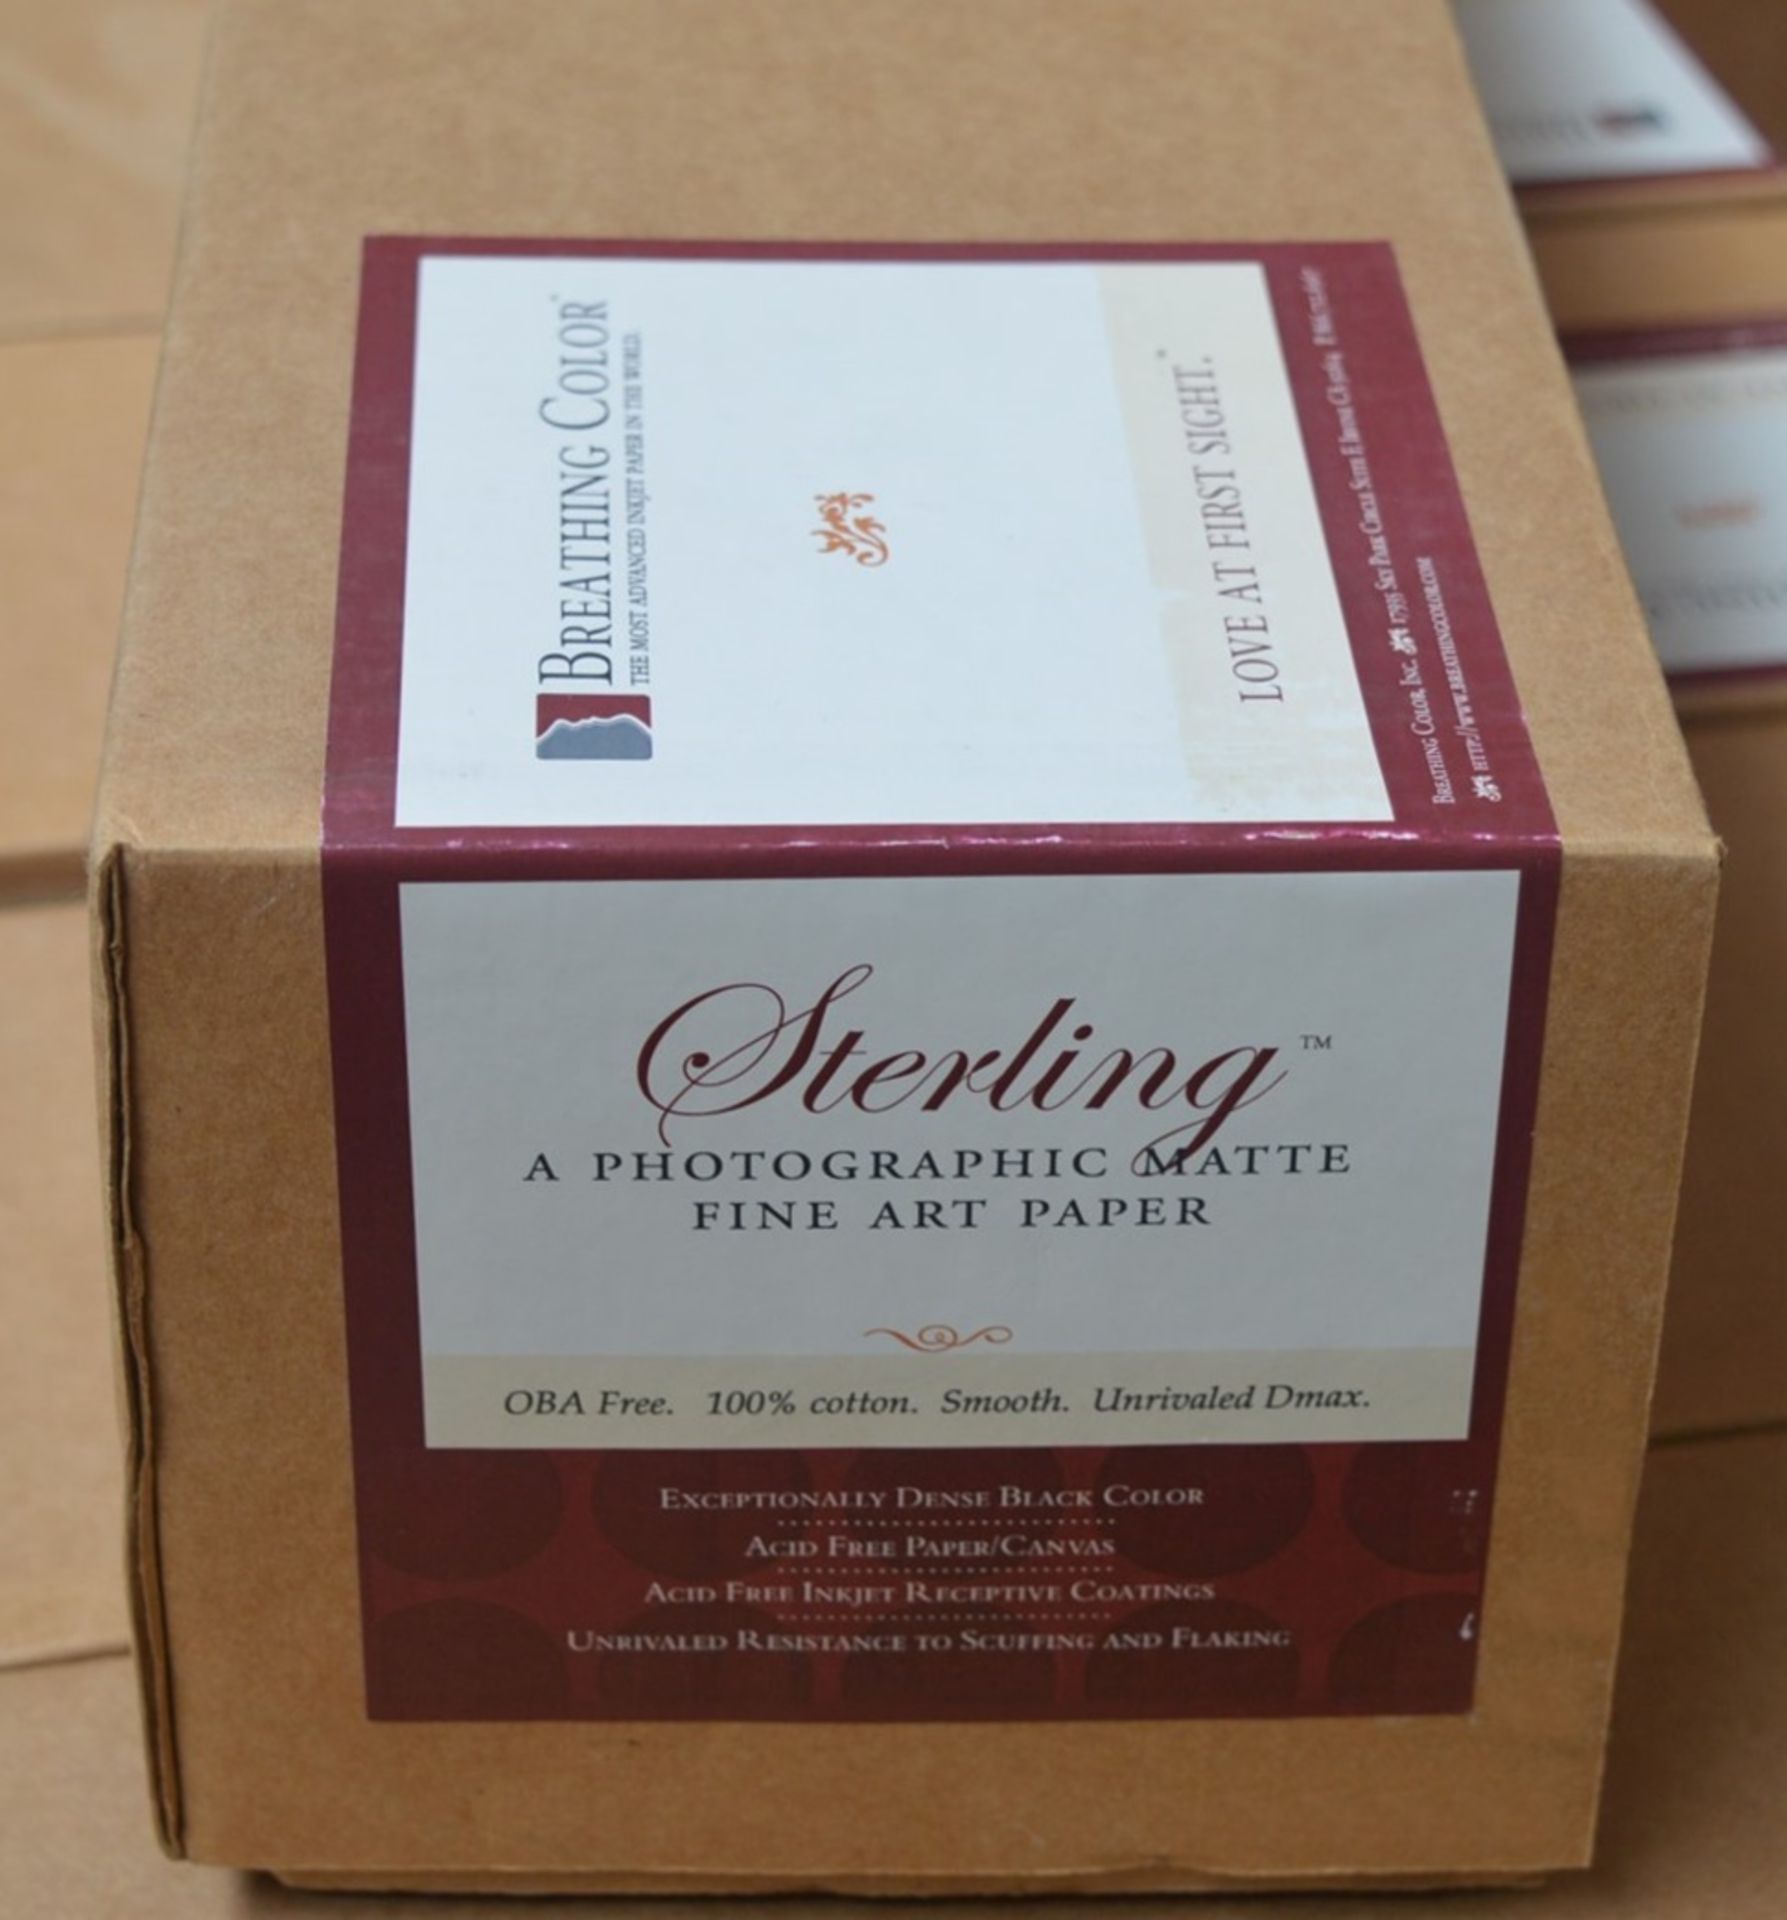 1 x Roll of Breathing Colour STERLING Photographic Matte Fine Art Paper - Size 24" x 40' - - Image 4 of 5